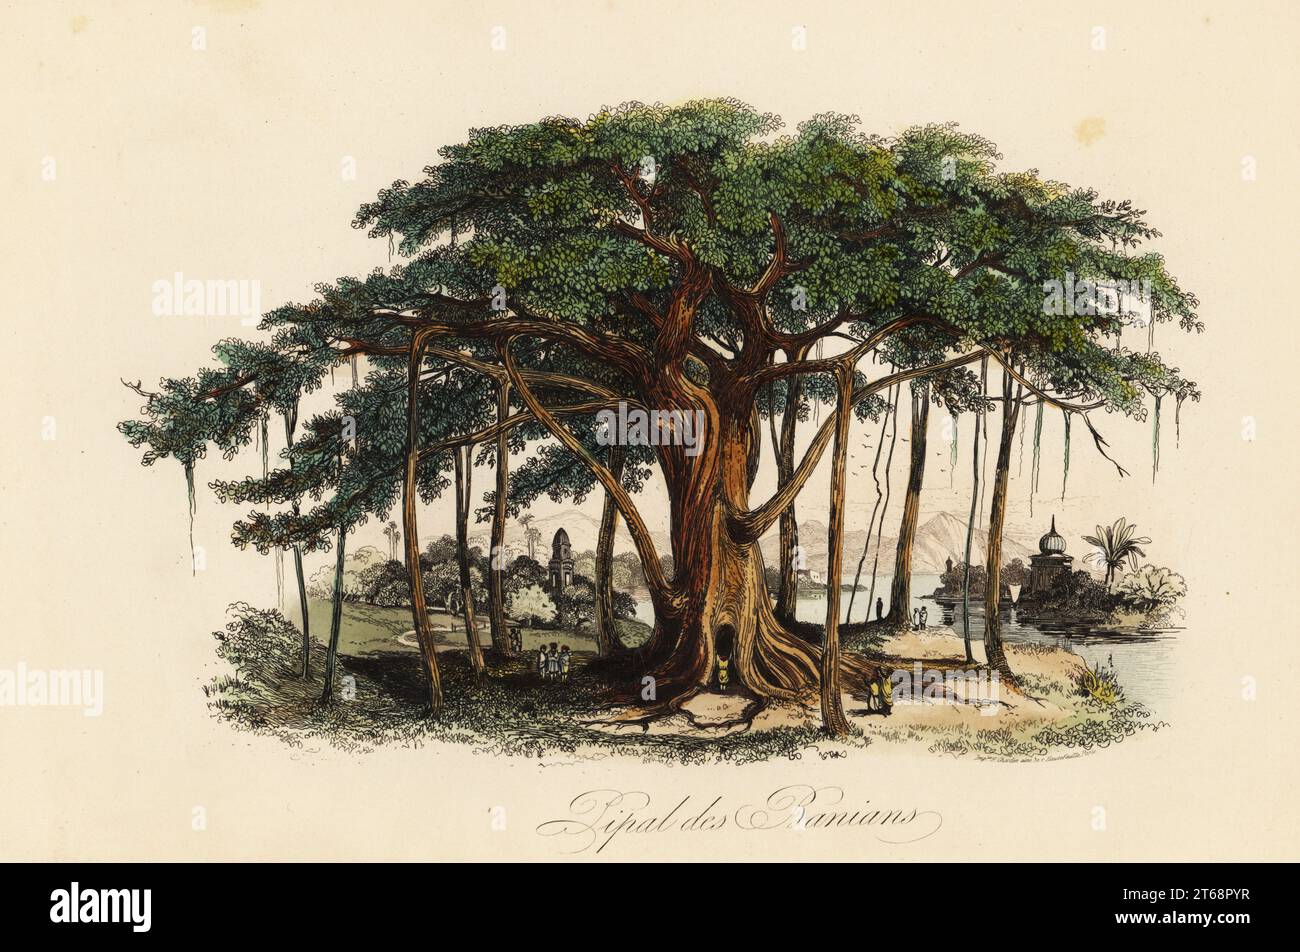 Sacred fig tree, Ficus religiosa, also known as the bodhi tree, banian tree, banyan tree, pippala tree, peepul tree, peepal tree or ashwattha tree. Pipal des banians. Handcoloured steel engraving printed by F. Chardon from Achille Comtes Musee dHistoire Naturelle, Museum of Natural History, Gustave Hazard, Paris, 1854. Stock Photo